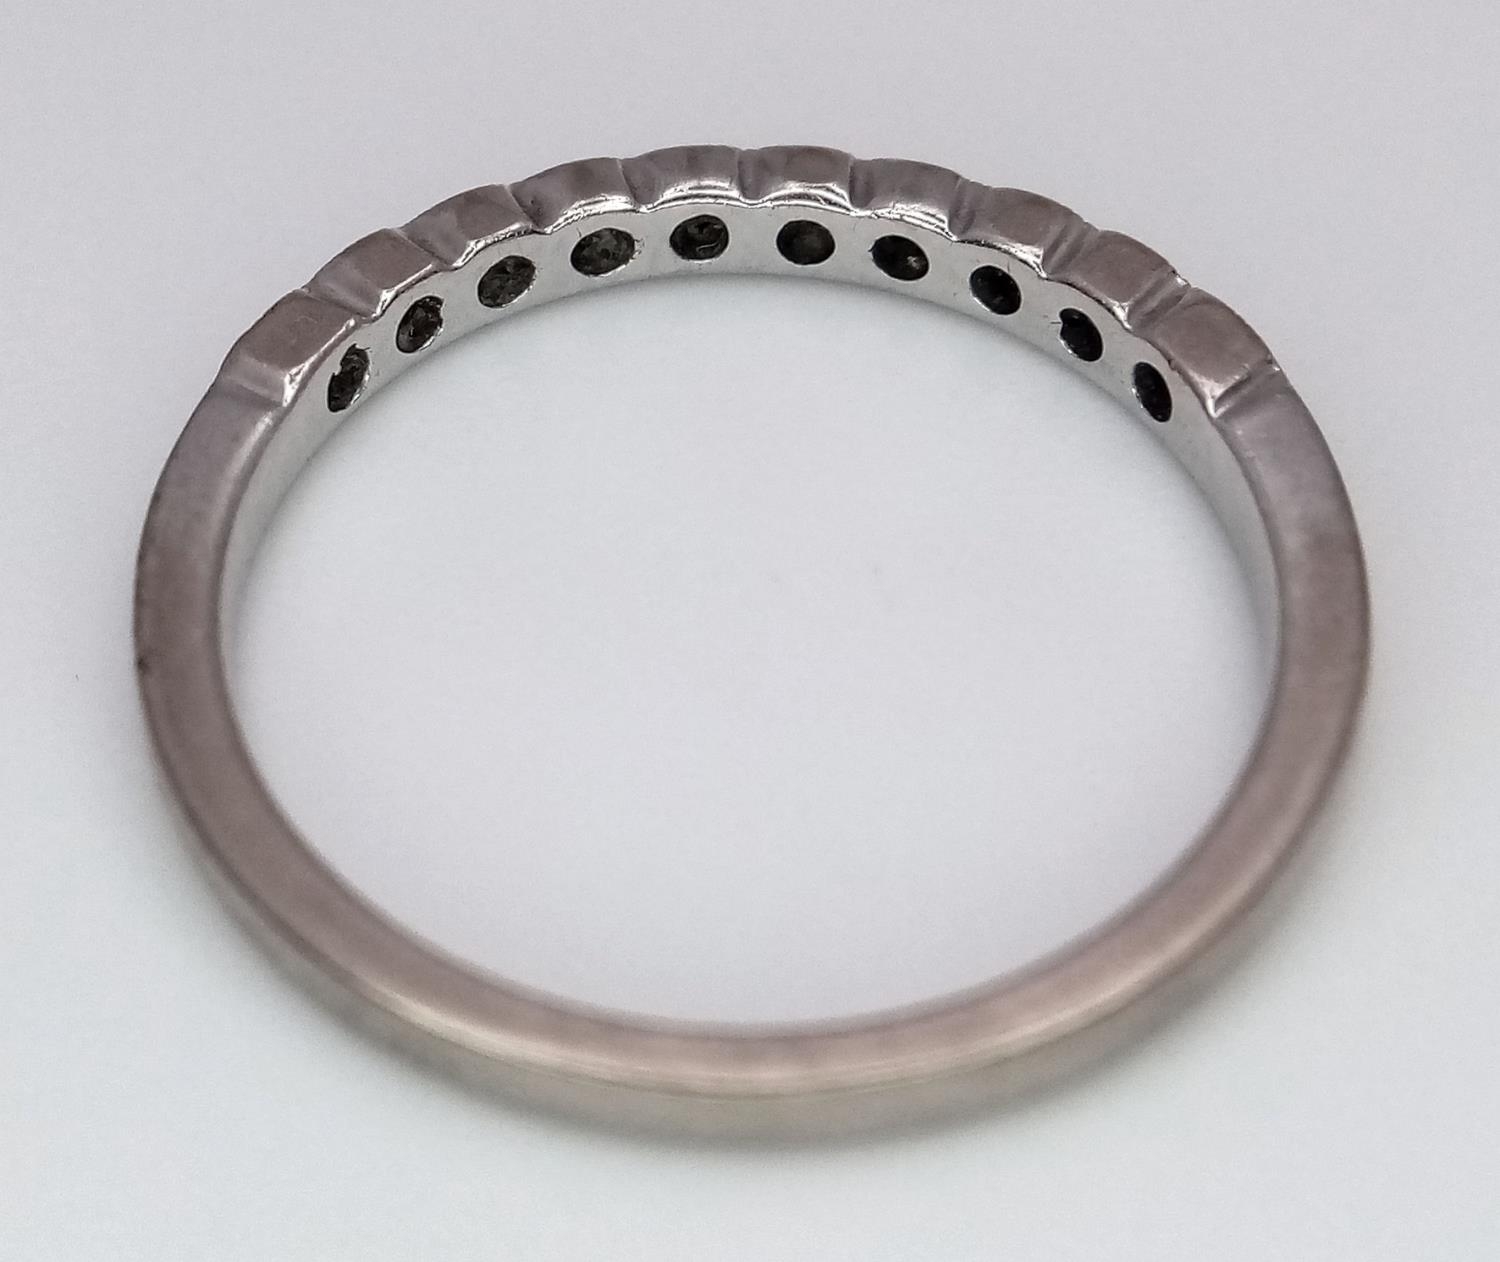 A Brown's Designer 18K White Gold and Diamond Half Eternity Ring. Size M. Comes with a Browns box. - Image 4 of 6